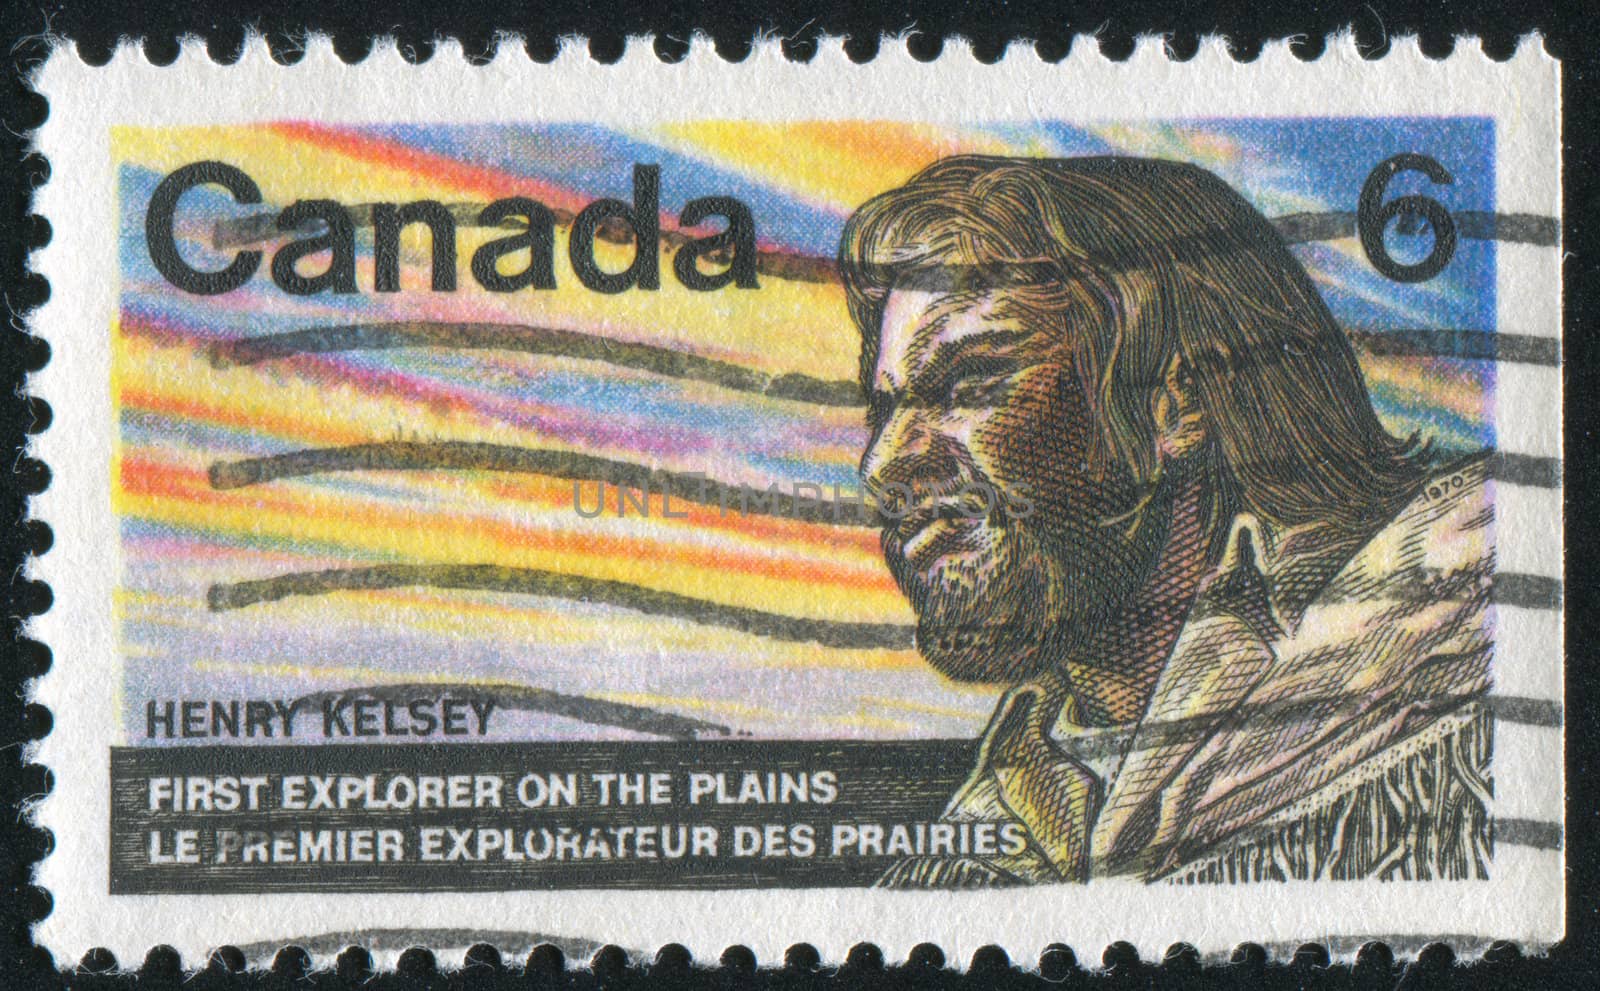 CANADA - CIRCA 1970: stamp printed by Canada, shows Henry Kelsey, circa 1970